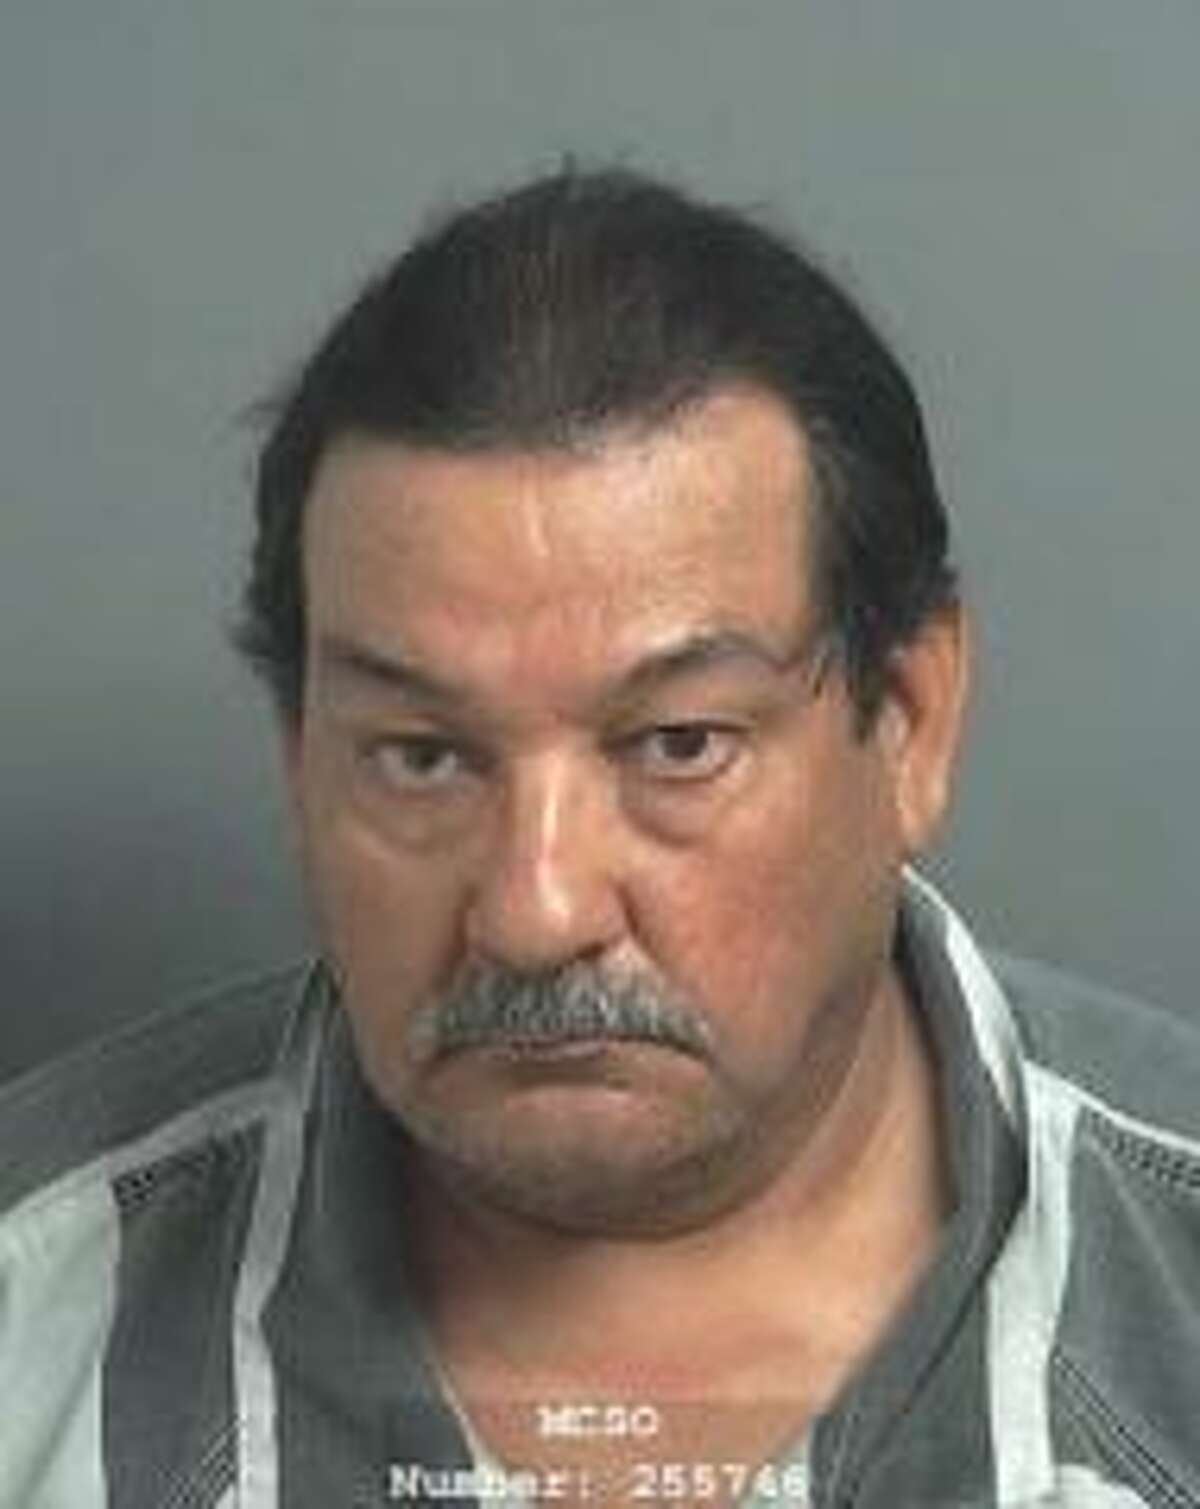 Jose Armando Lopez Solorio, 61, was charged with super aggravated sexual assault of a child.